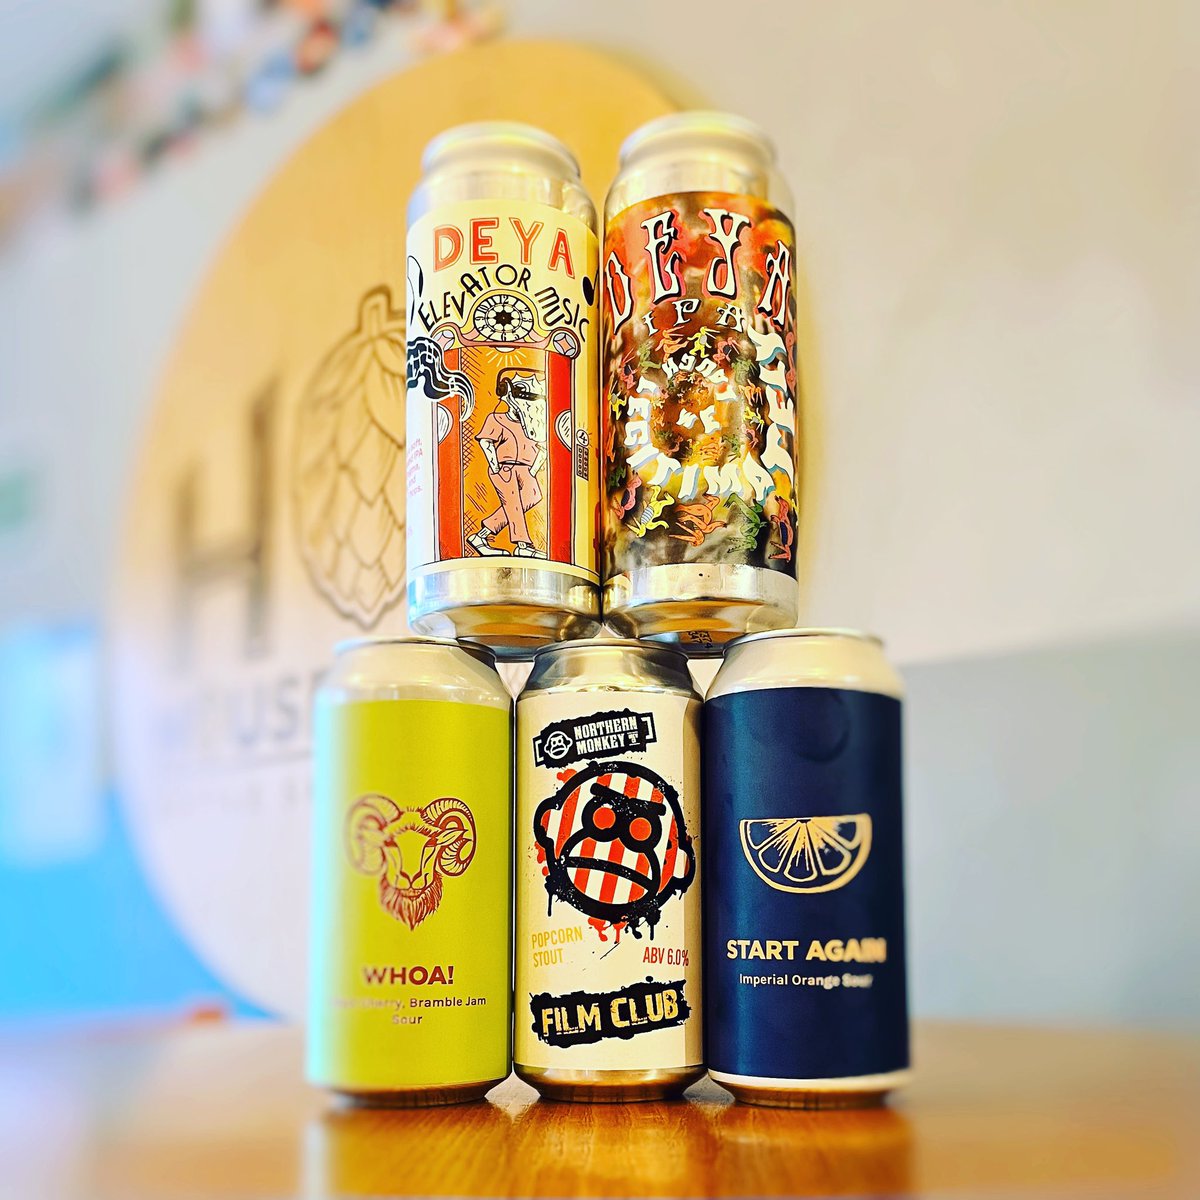 New cans in this week guys ready for weekend!! 2 brand new IPA’s from @deyabrewery 2 new sours from @PomonaIsland including the @Blackjackbeers collab & finally returning is Film Club from @NMonkeyBrewCo a 6% Popcorn Stout 🍿➡️ houseofhopsm27.co.uk